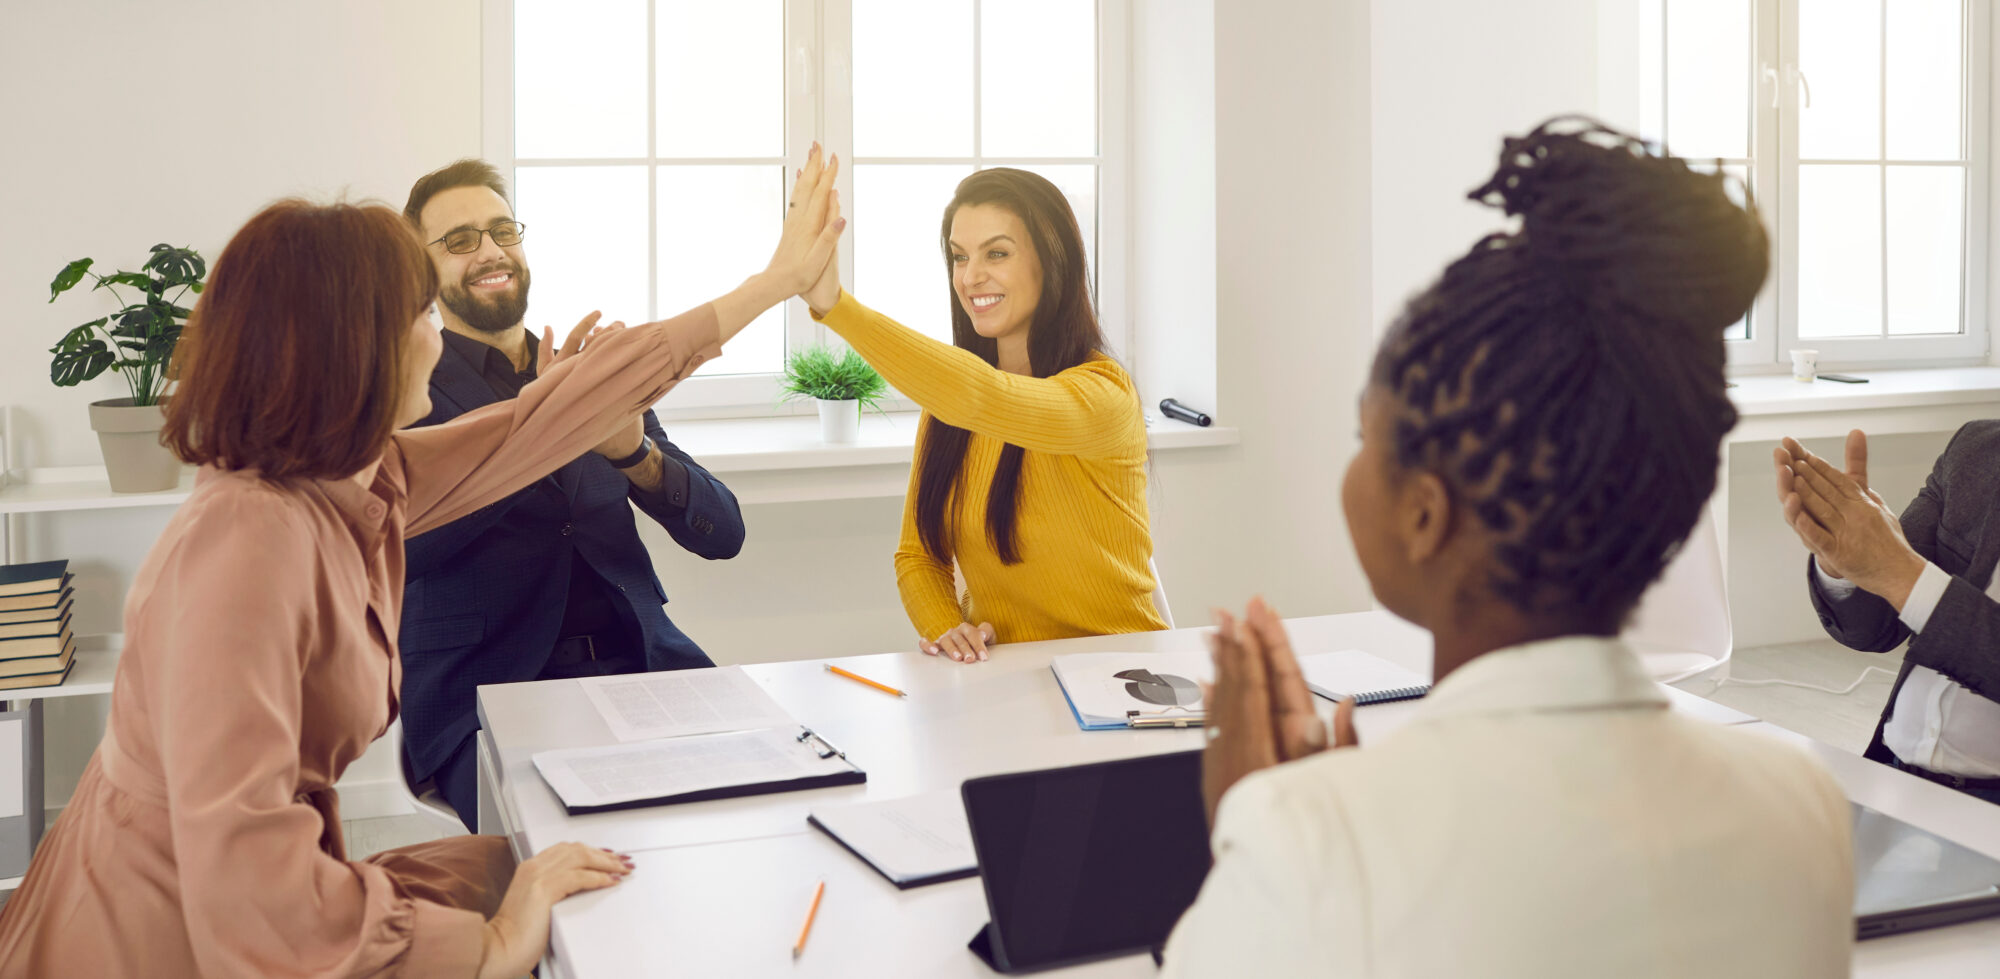 Happy women high five each other as they celebrate success during meeting with their business team